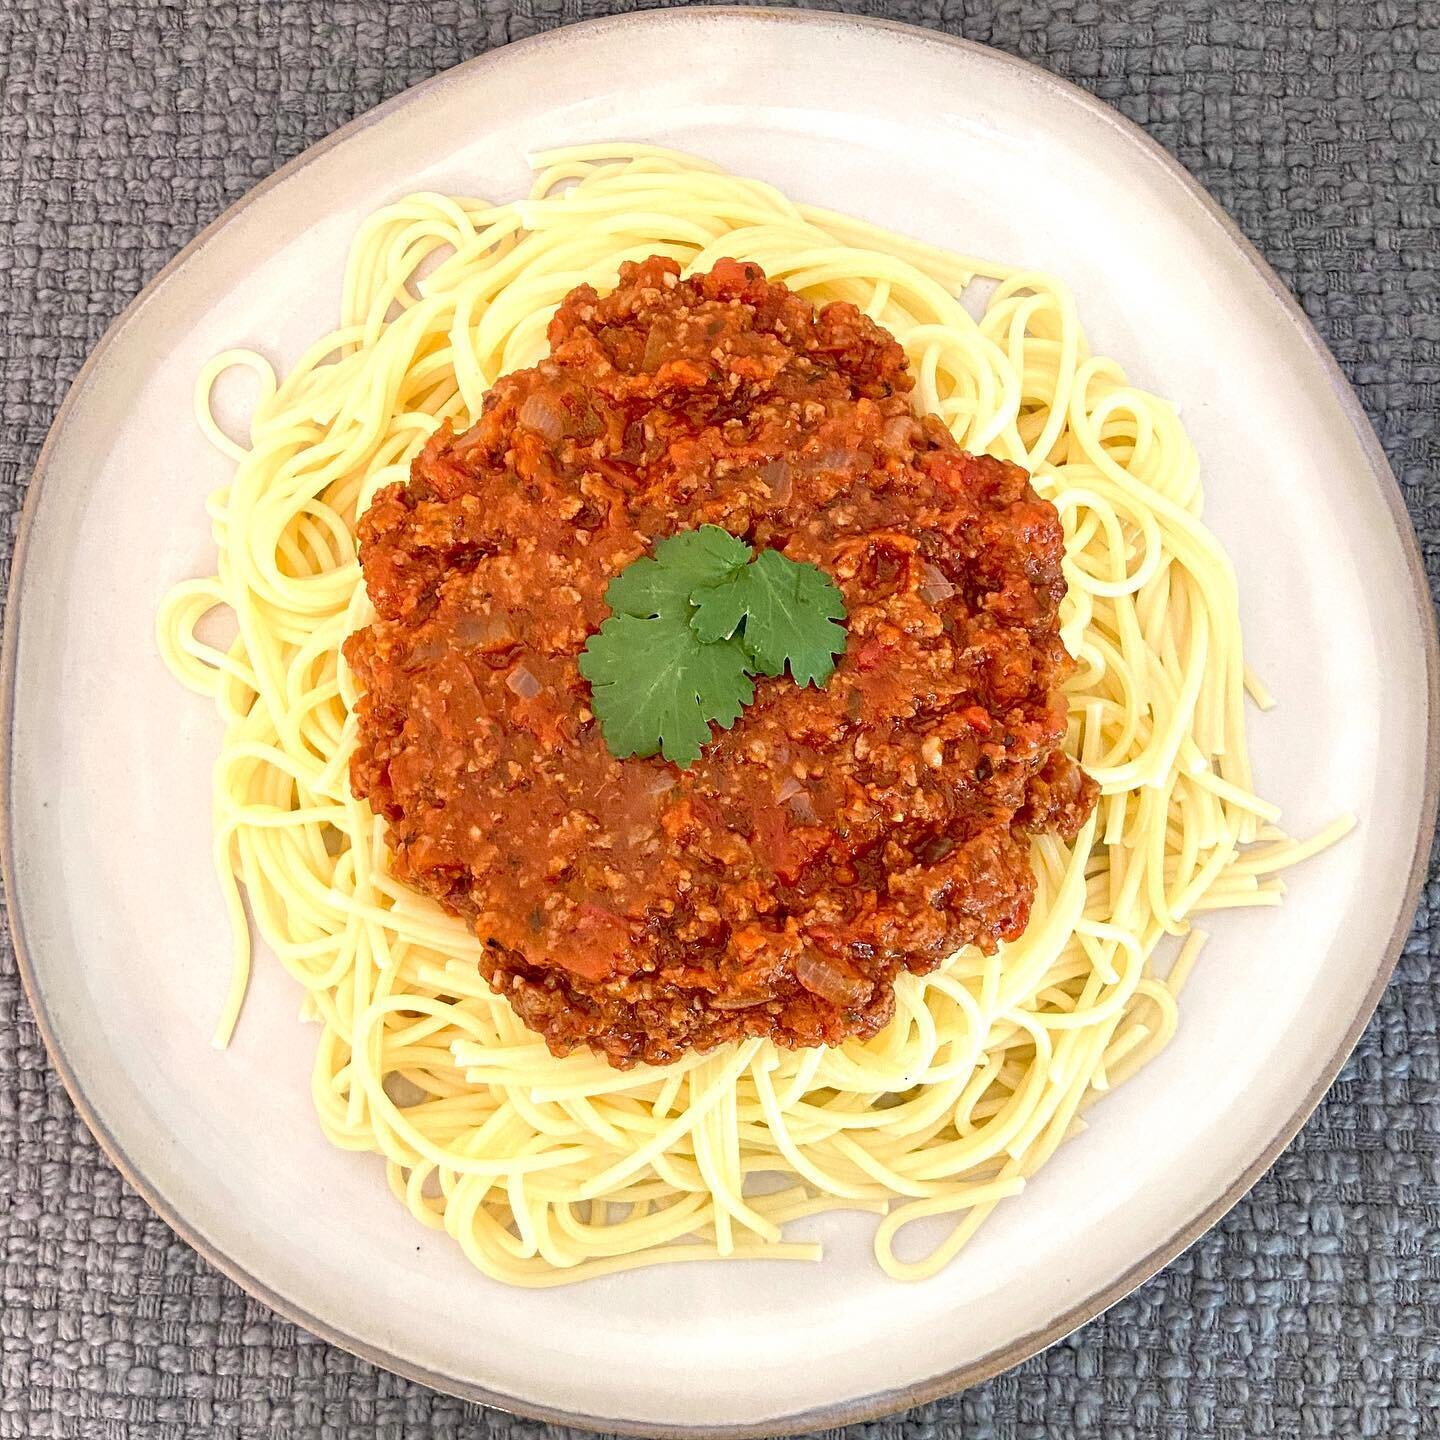 HEARTY PASTA SAUCE

This sauce is so versatile you can use it for any pasta sauce, as a lasagna sauce or even just to dip garlic bread into. It is freezer friendly so you can always make more and save it for a rainy day!

𝘞𝘢𝘯𝘵 𝘵𝘩𝘦 𝘳𝘦𝘤𝘪𝘱𝘦